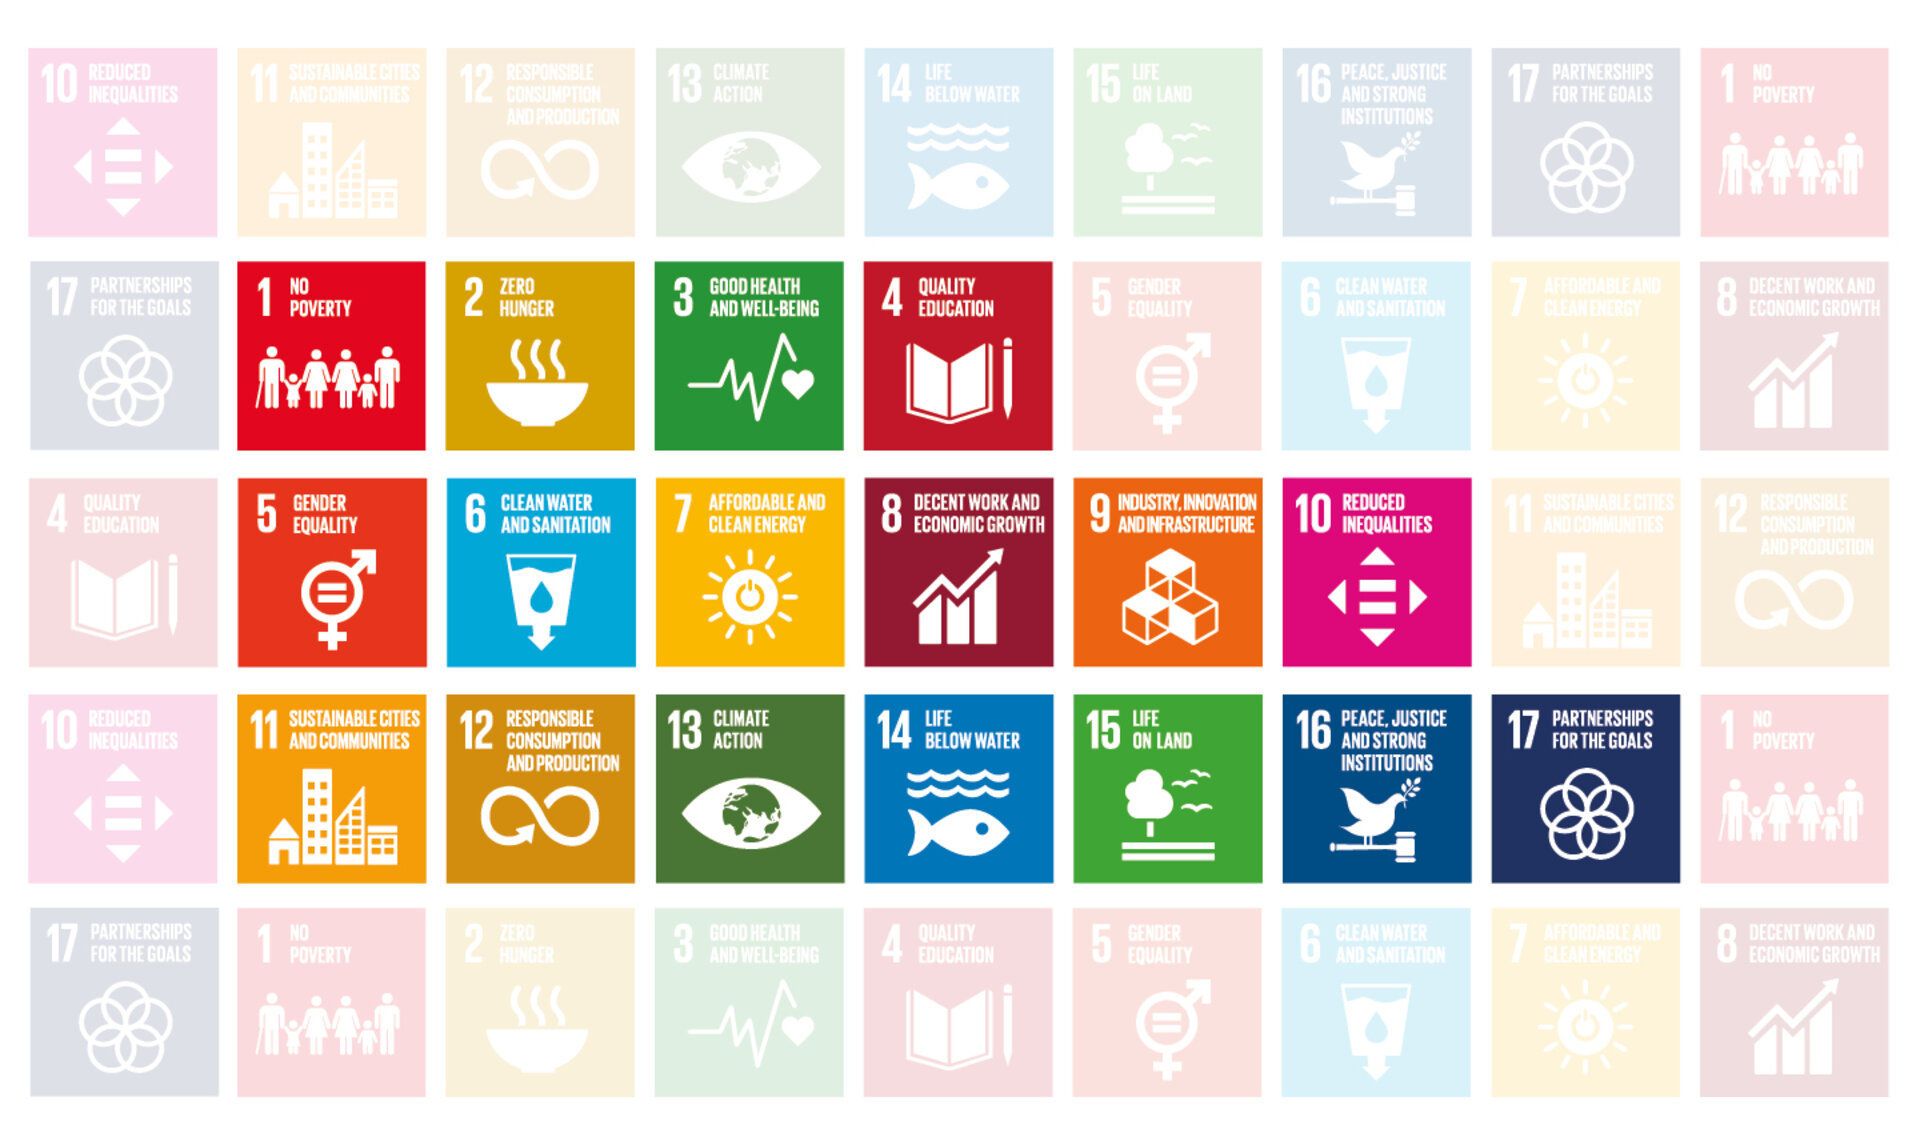 An SDGs graphic, JPEG file with dimensions 1440x850.